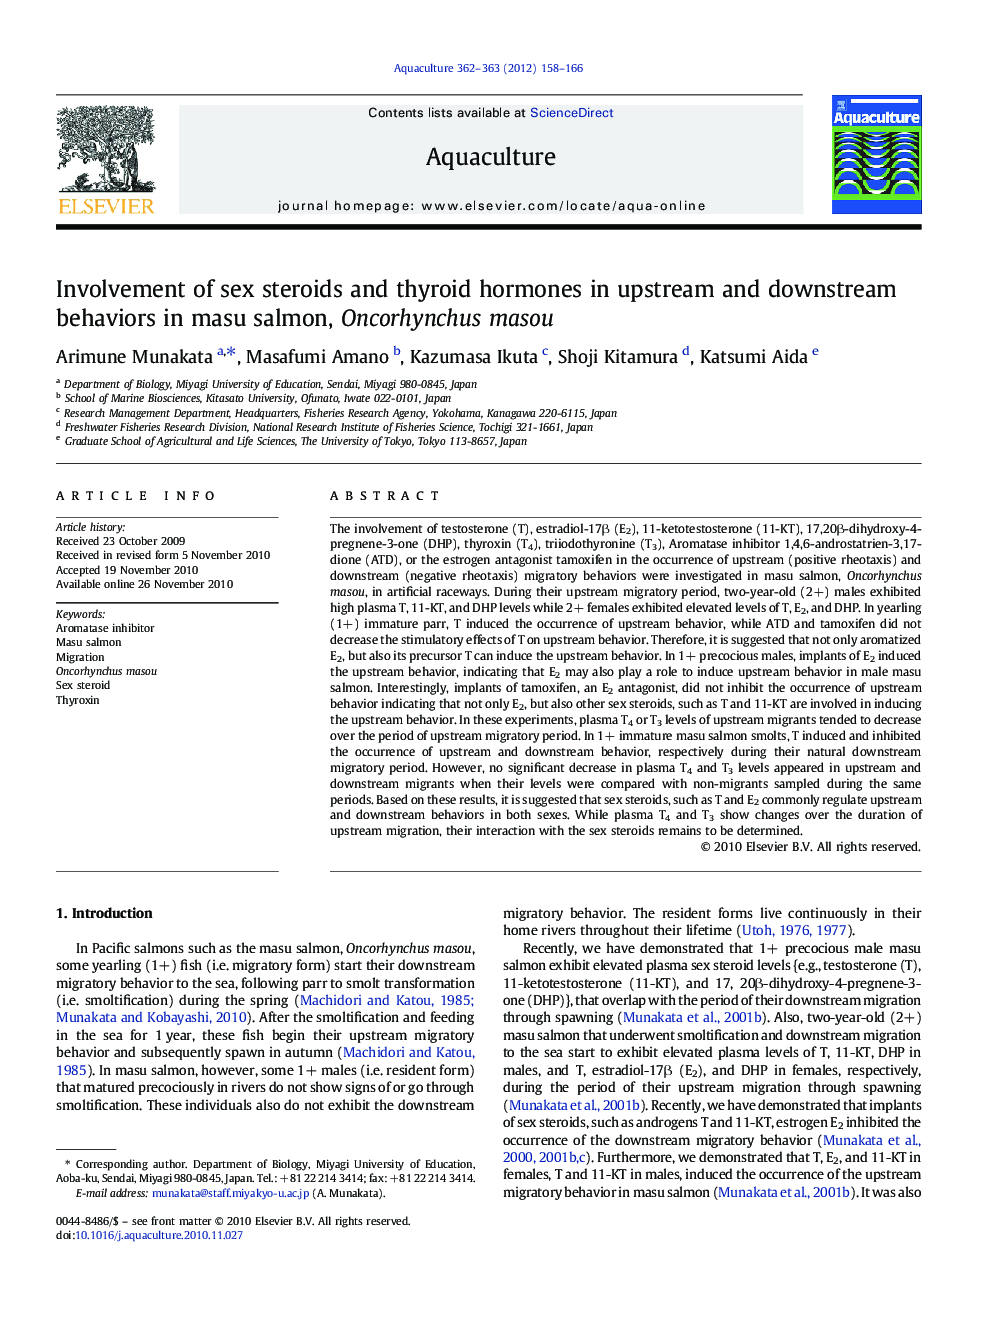 Involvement of sex steroids and thyroid hormones in upstream and downstream behaviors in masu salmon, Oncorhynchus masou